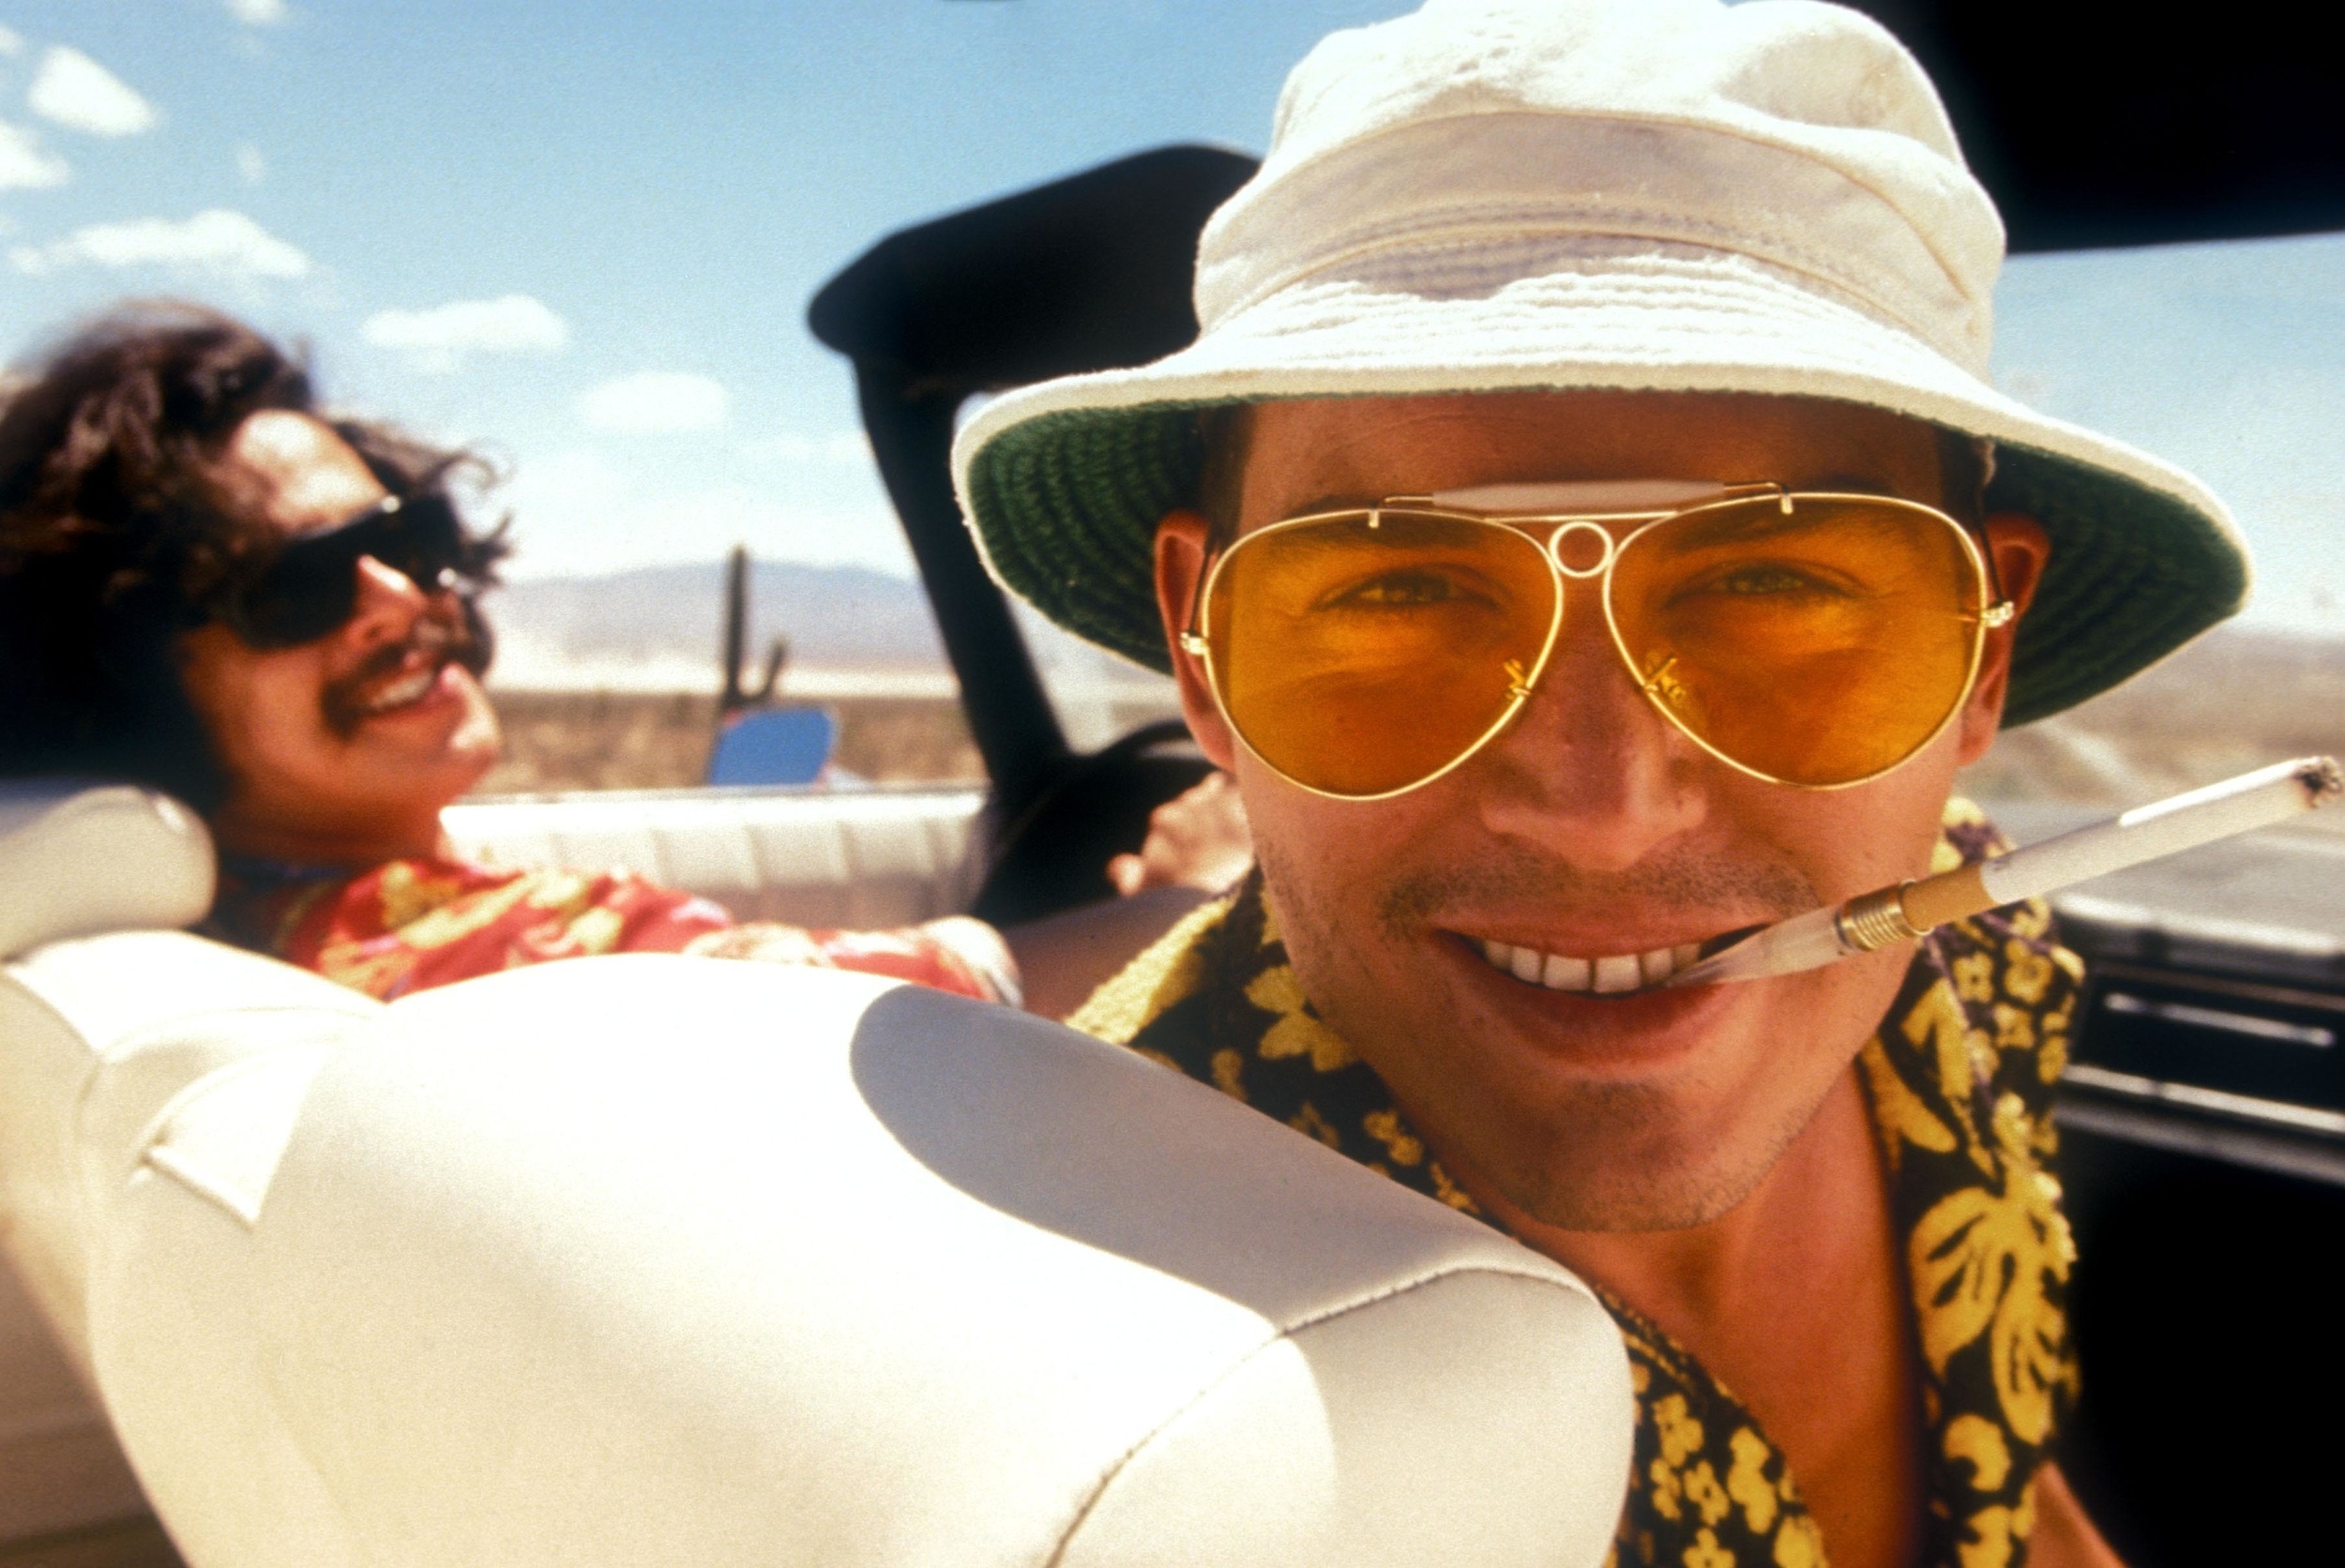 <p>In these modern times, a film starring Johnny Depp and directed by Terry Gilliam is perhaps not going to be remembered as fondly, and <em>Fear and Loathing in Las Vegas</em> has always been more of a cult movie anyway. It hooks you in with the first line, effectively a statement of purpose: “We were somewhere around Barstow, on the edge of the desert, when the drugs began to take hold.”</p><p>You may also like: <a href='https://www.yardbarker.com/entertainment/articles/the_20_best_bad_movies_of_all_time/s1__30206336'>The 20 best bad movies of all time</a></p>